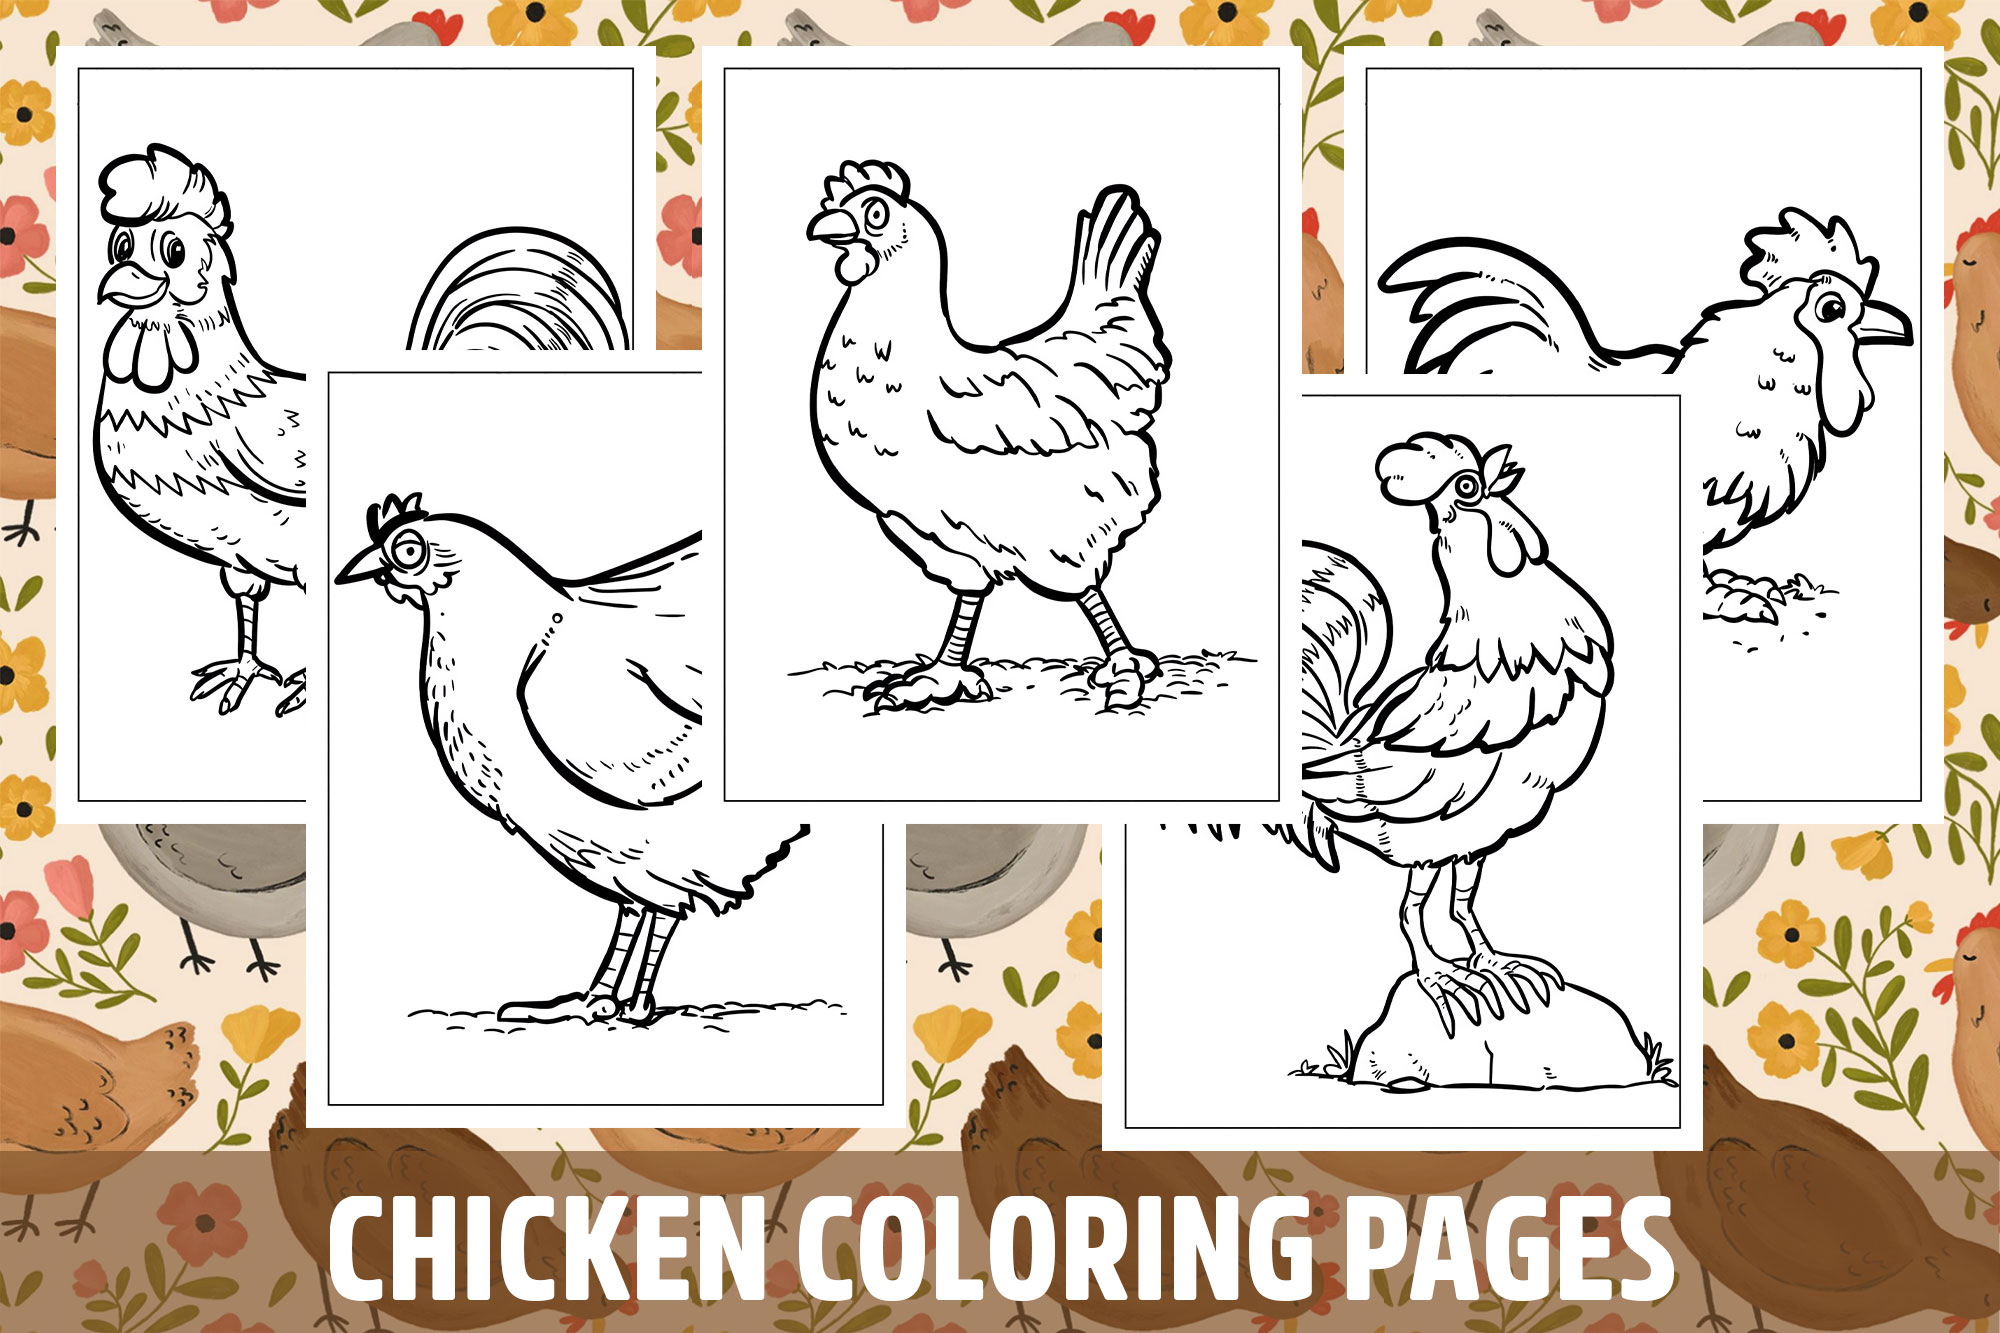 Chicken coloring pages for kids girls boys teens birthday school activity made by teachers